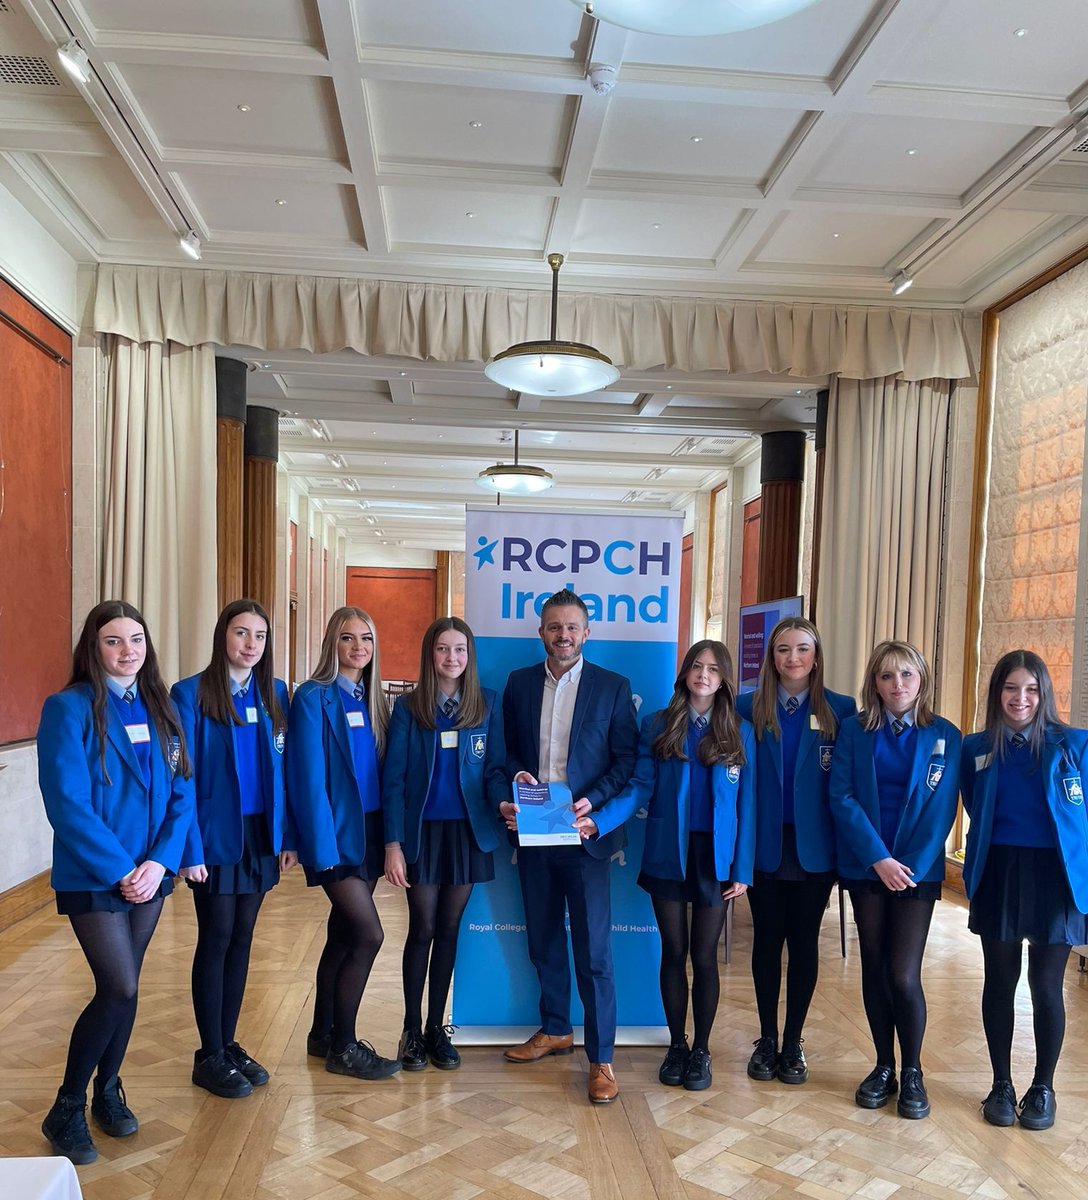 Our Year 10 pupils @SaintMarysDerry are @Stormont Parliament Building today as @RCPCHIreland @RCPCH_and_Us launch the #WorriedAndWaiting report into the increasing outpatient waiting times for children. What a great opportunity to represent the #pupilvoice for #NorthernIreland 💙